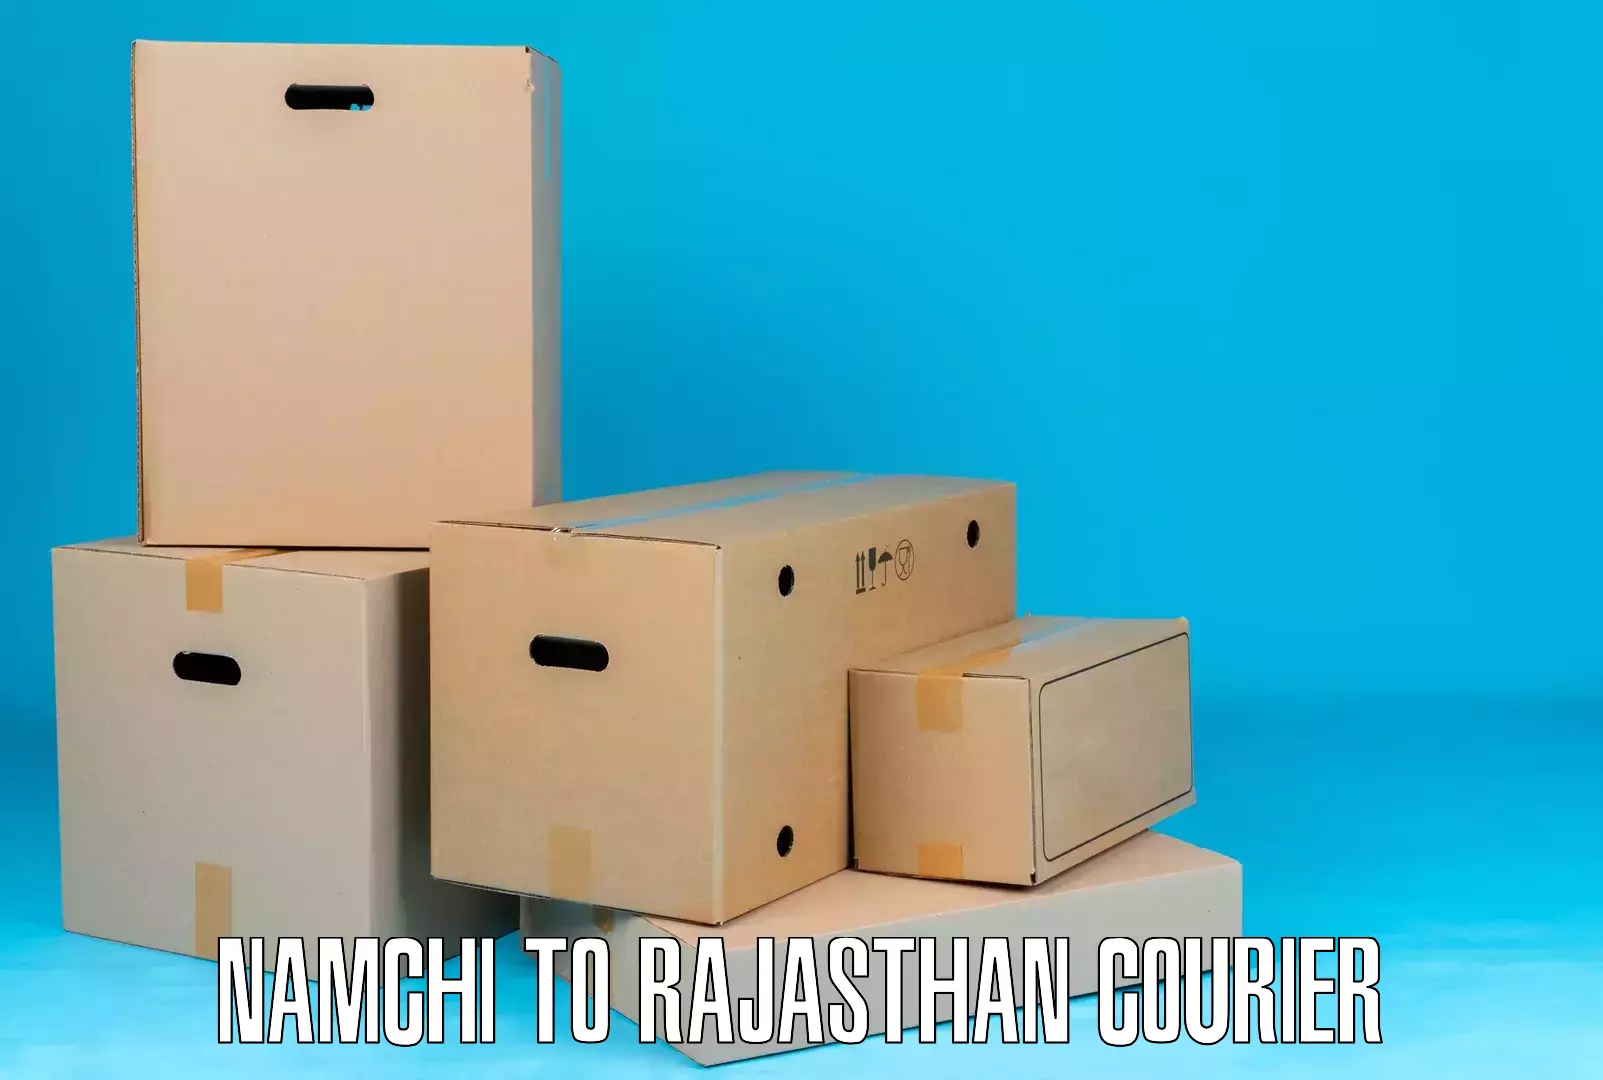 End-to-end delivery in Namchi to Rajasthan